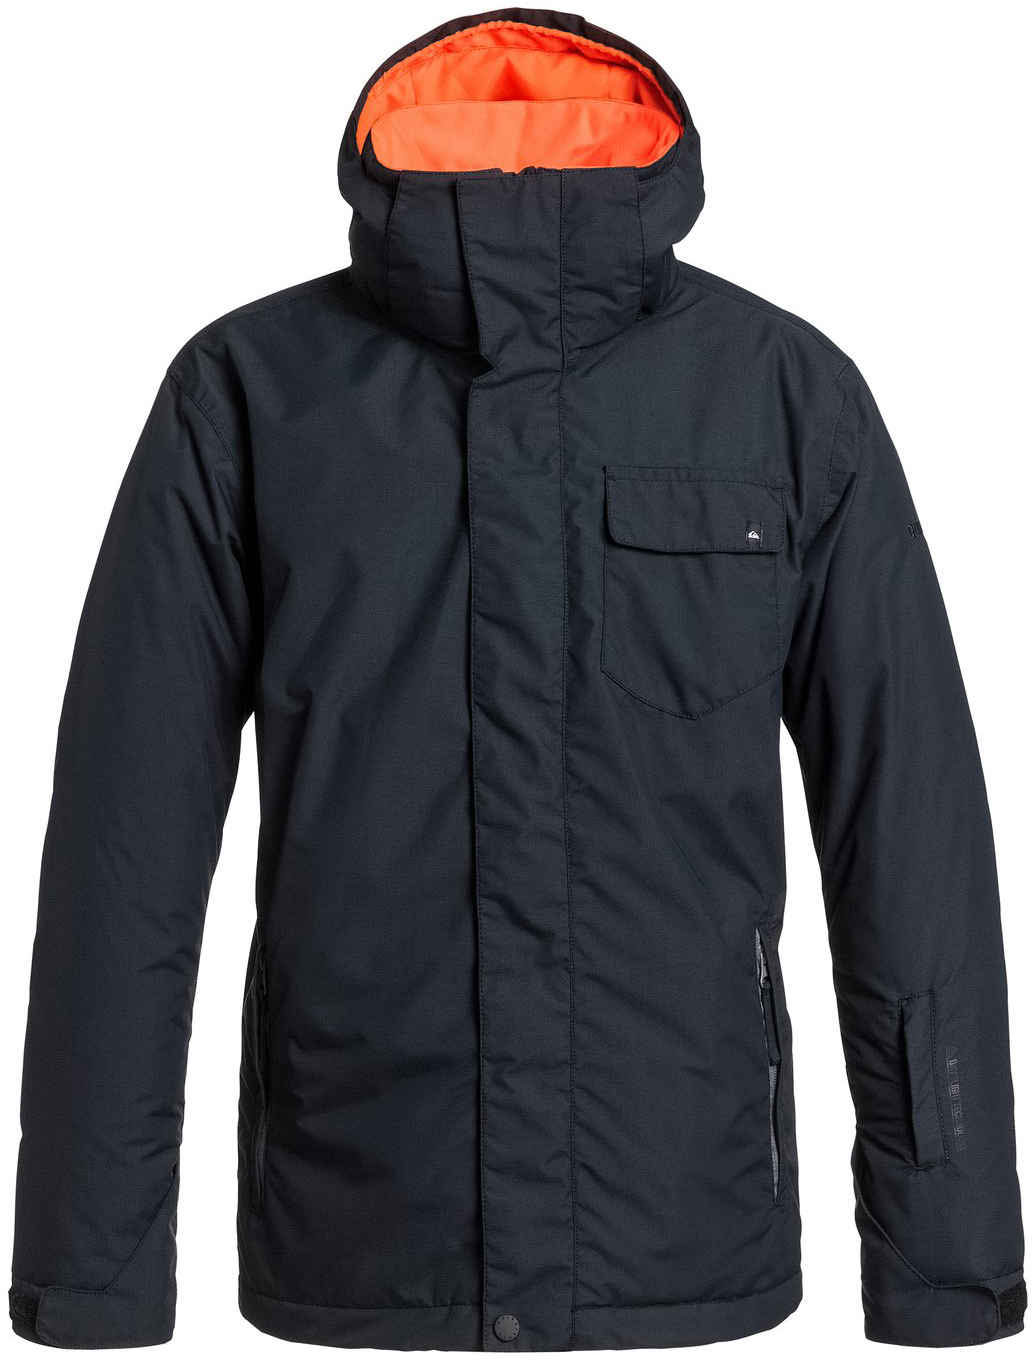 Quicksilver Mission Solid Jacket Review & Buying Guide